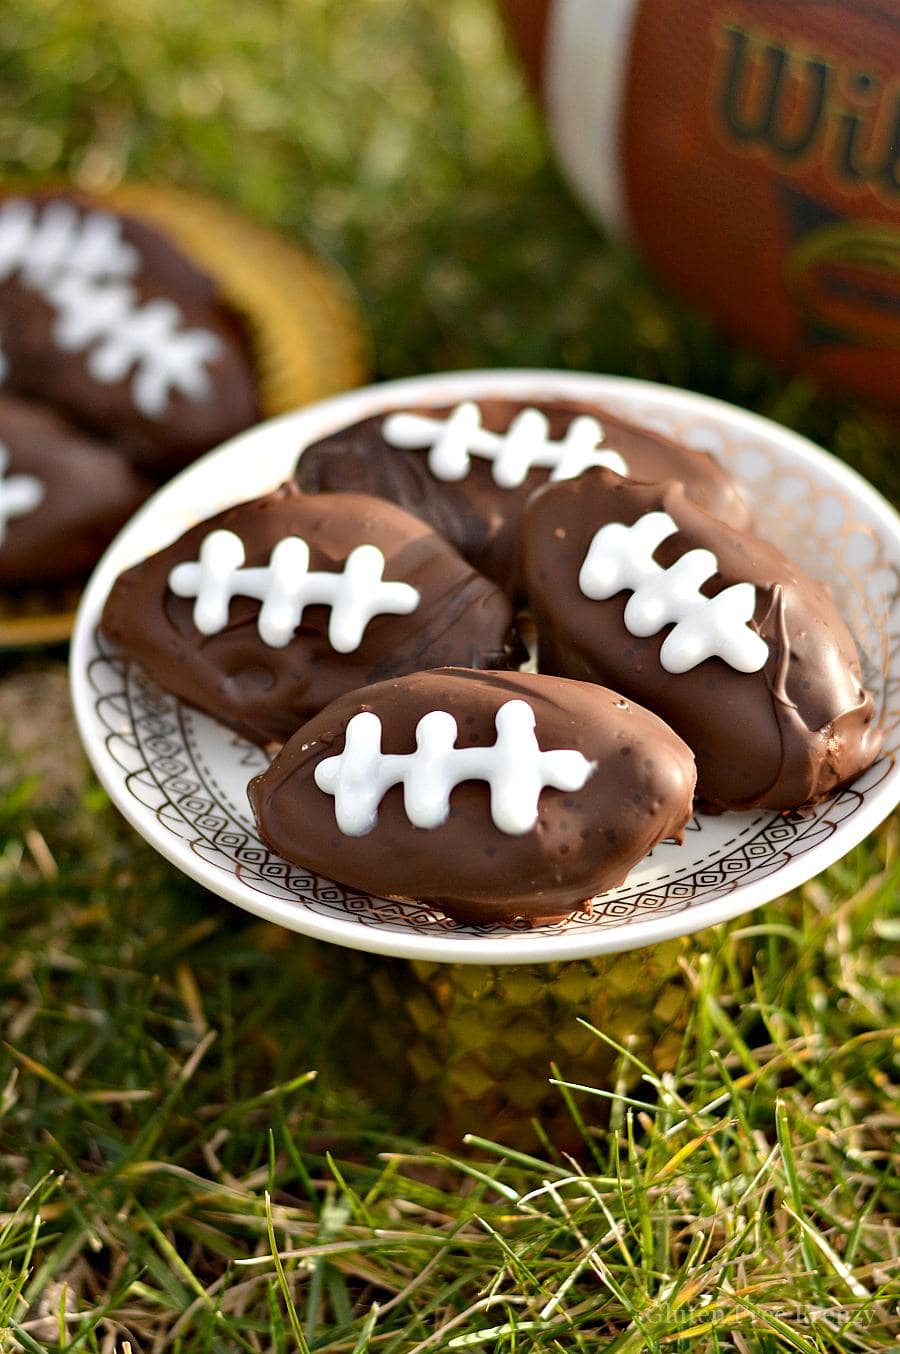 These gluten-free cookie dough footballs are perfect for your next sports night or Superbowl party. They are easy to make and everyone will love them!